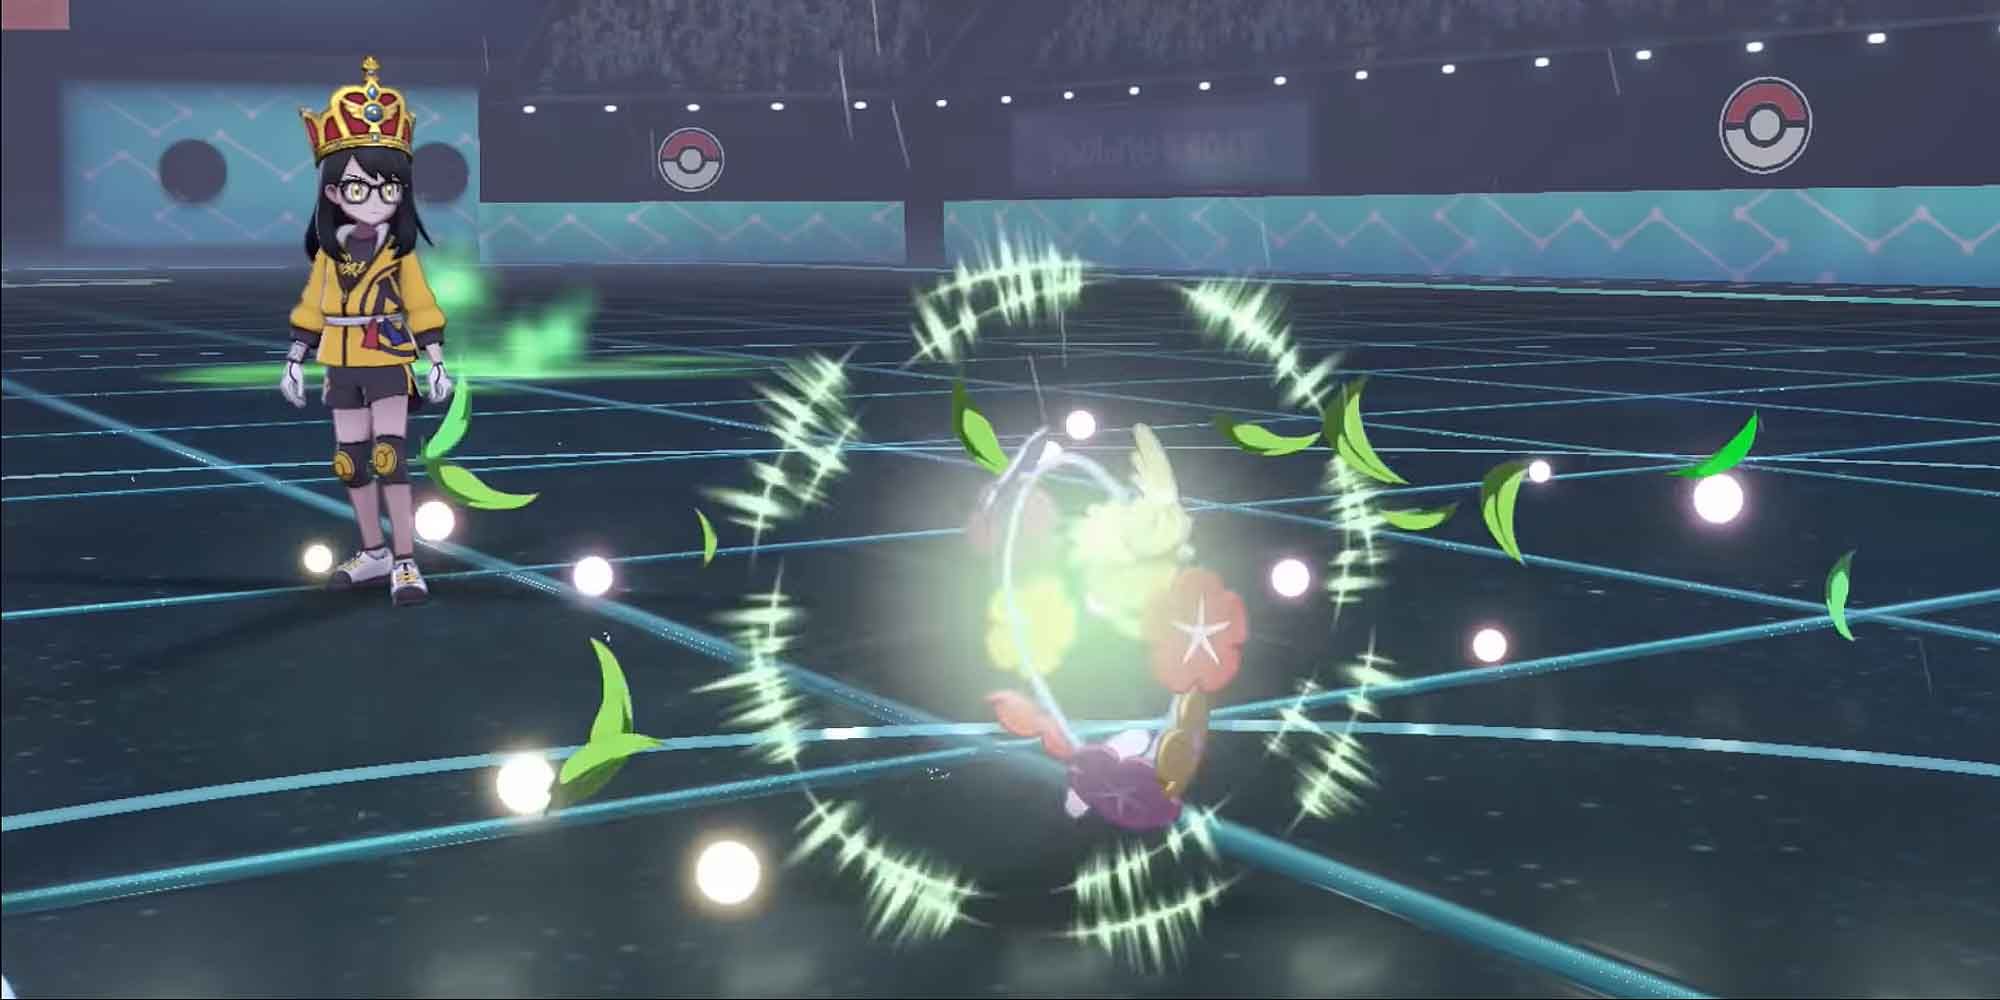 Comfey in the arena in Pokemon Sword and Shield